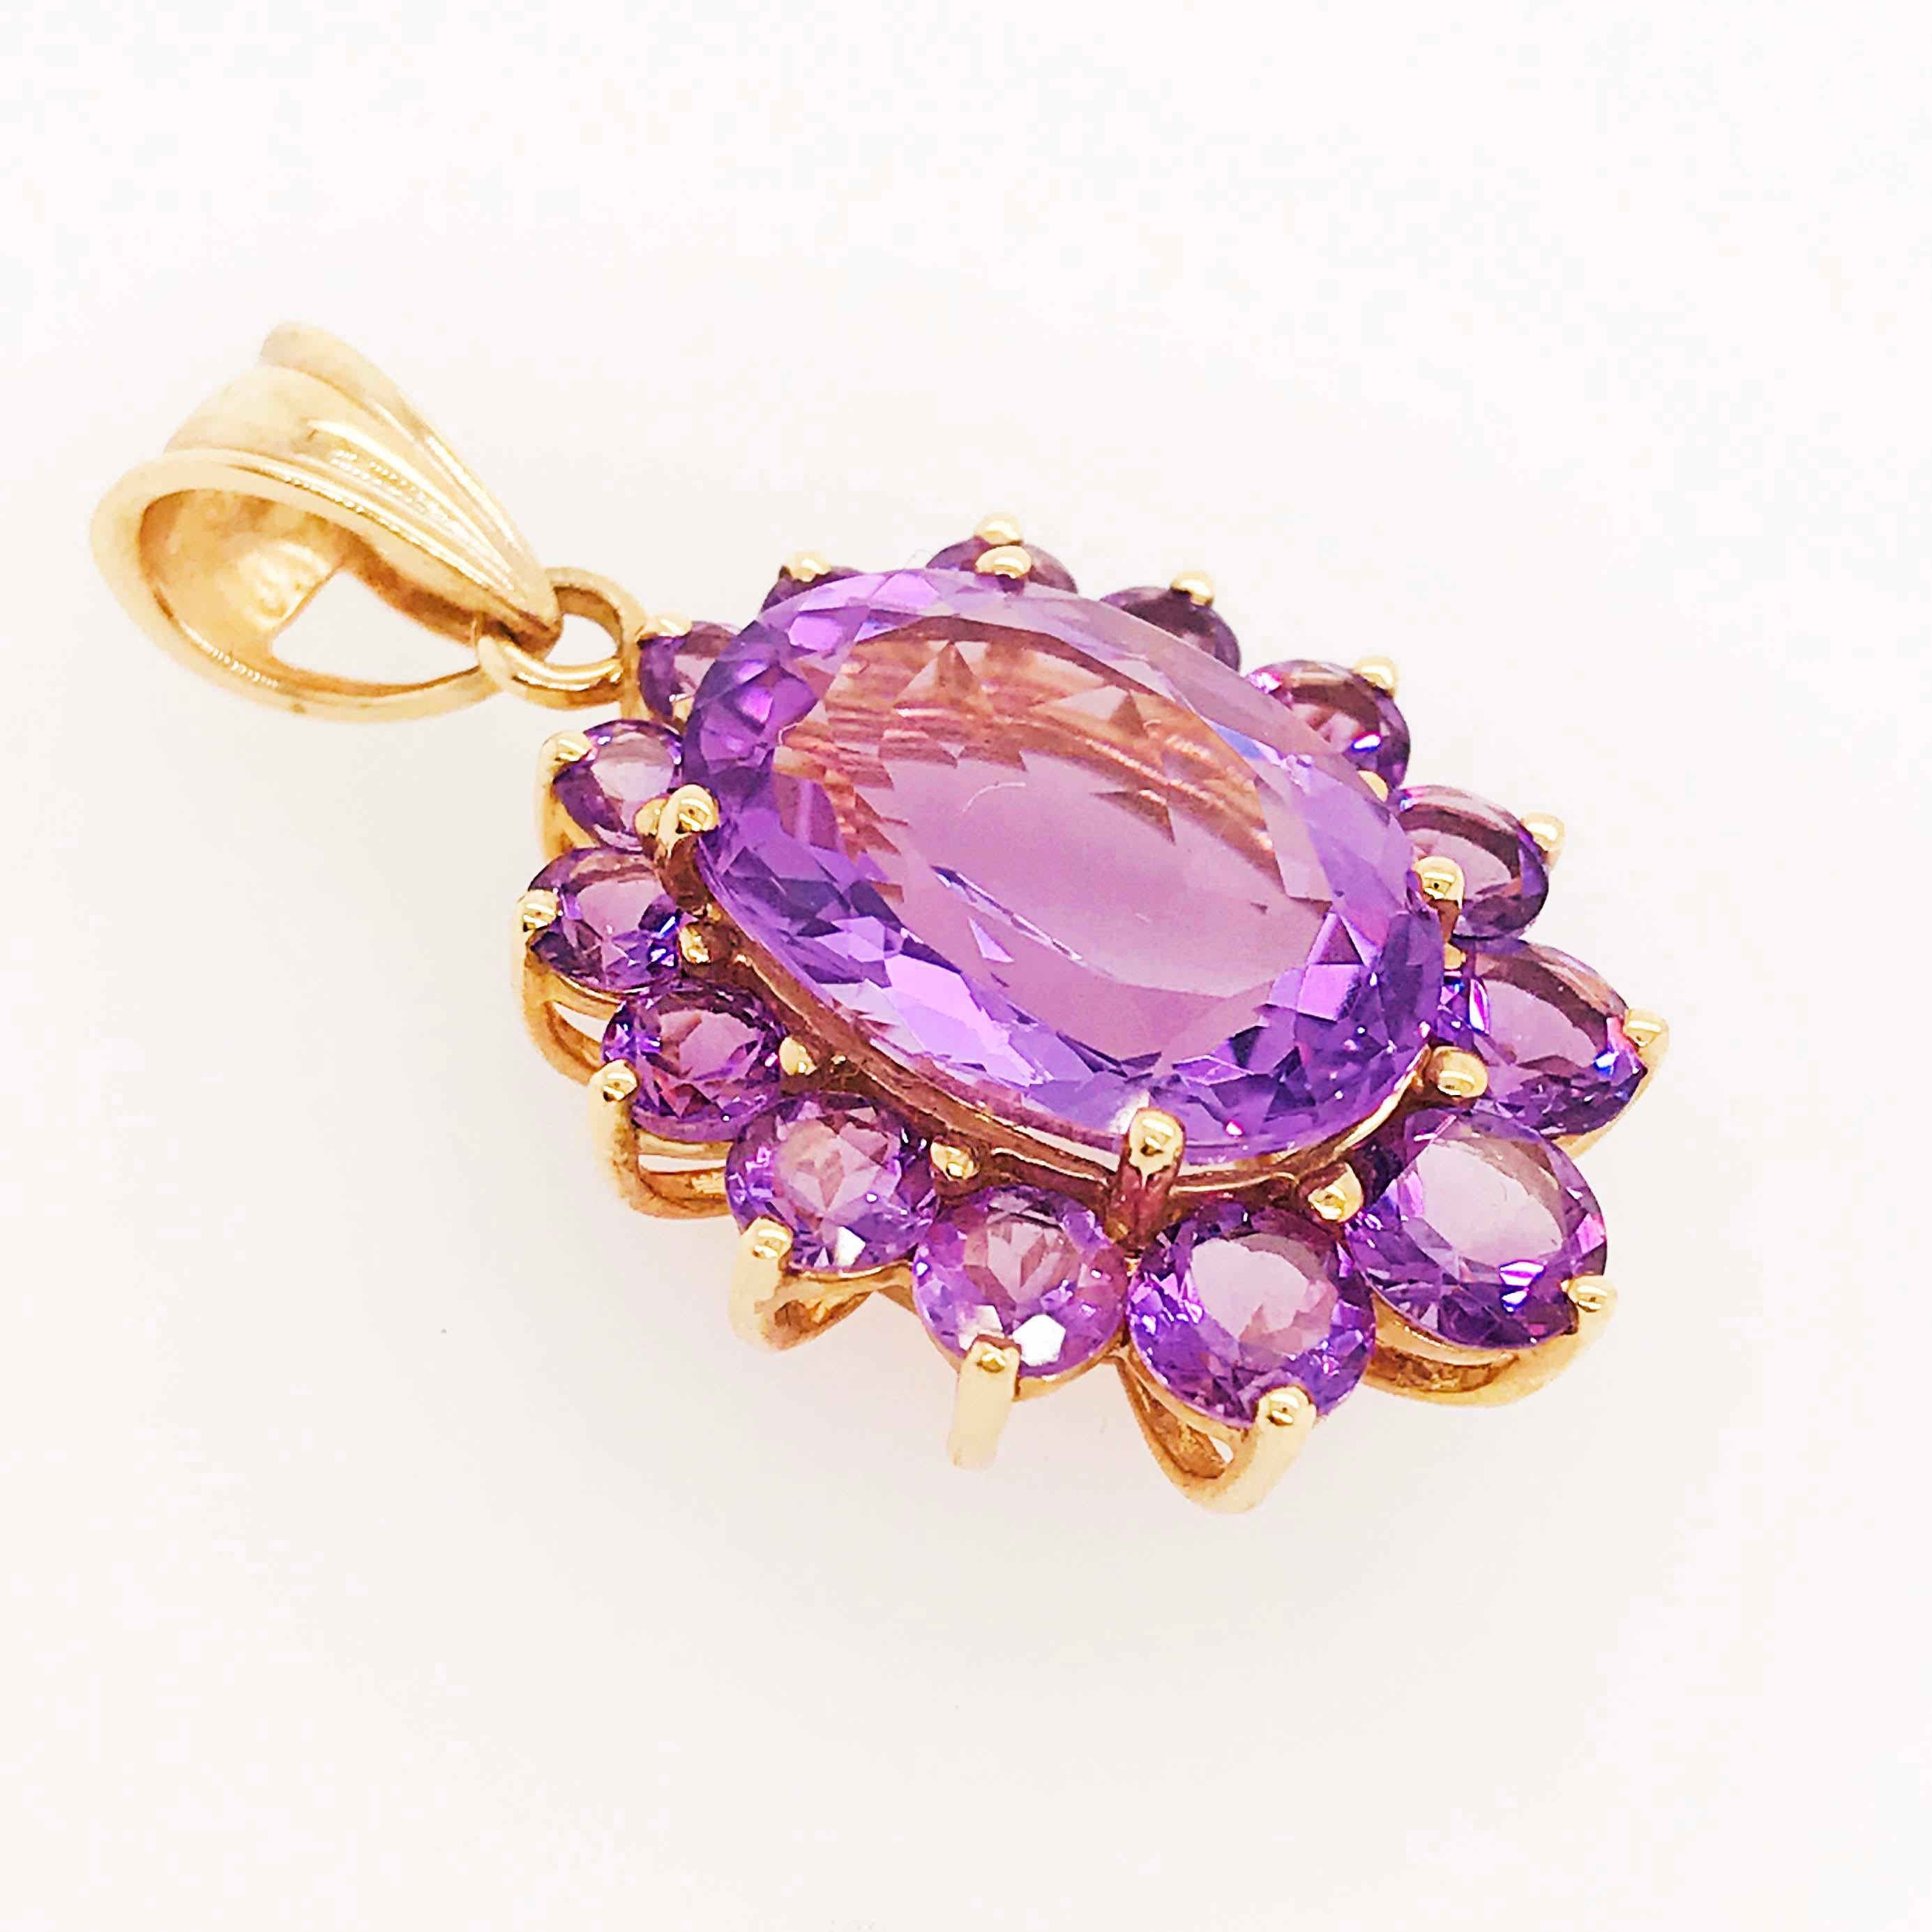 12 Carat Oval and Round Amethyst Custom Women's Power Pendant or Women’s Rights 1